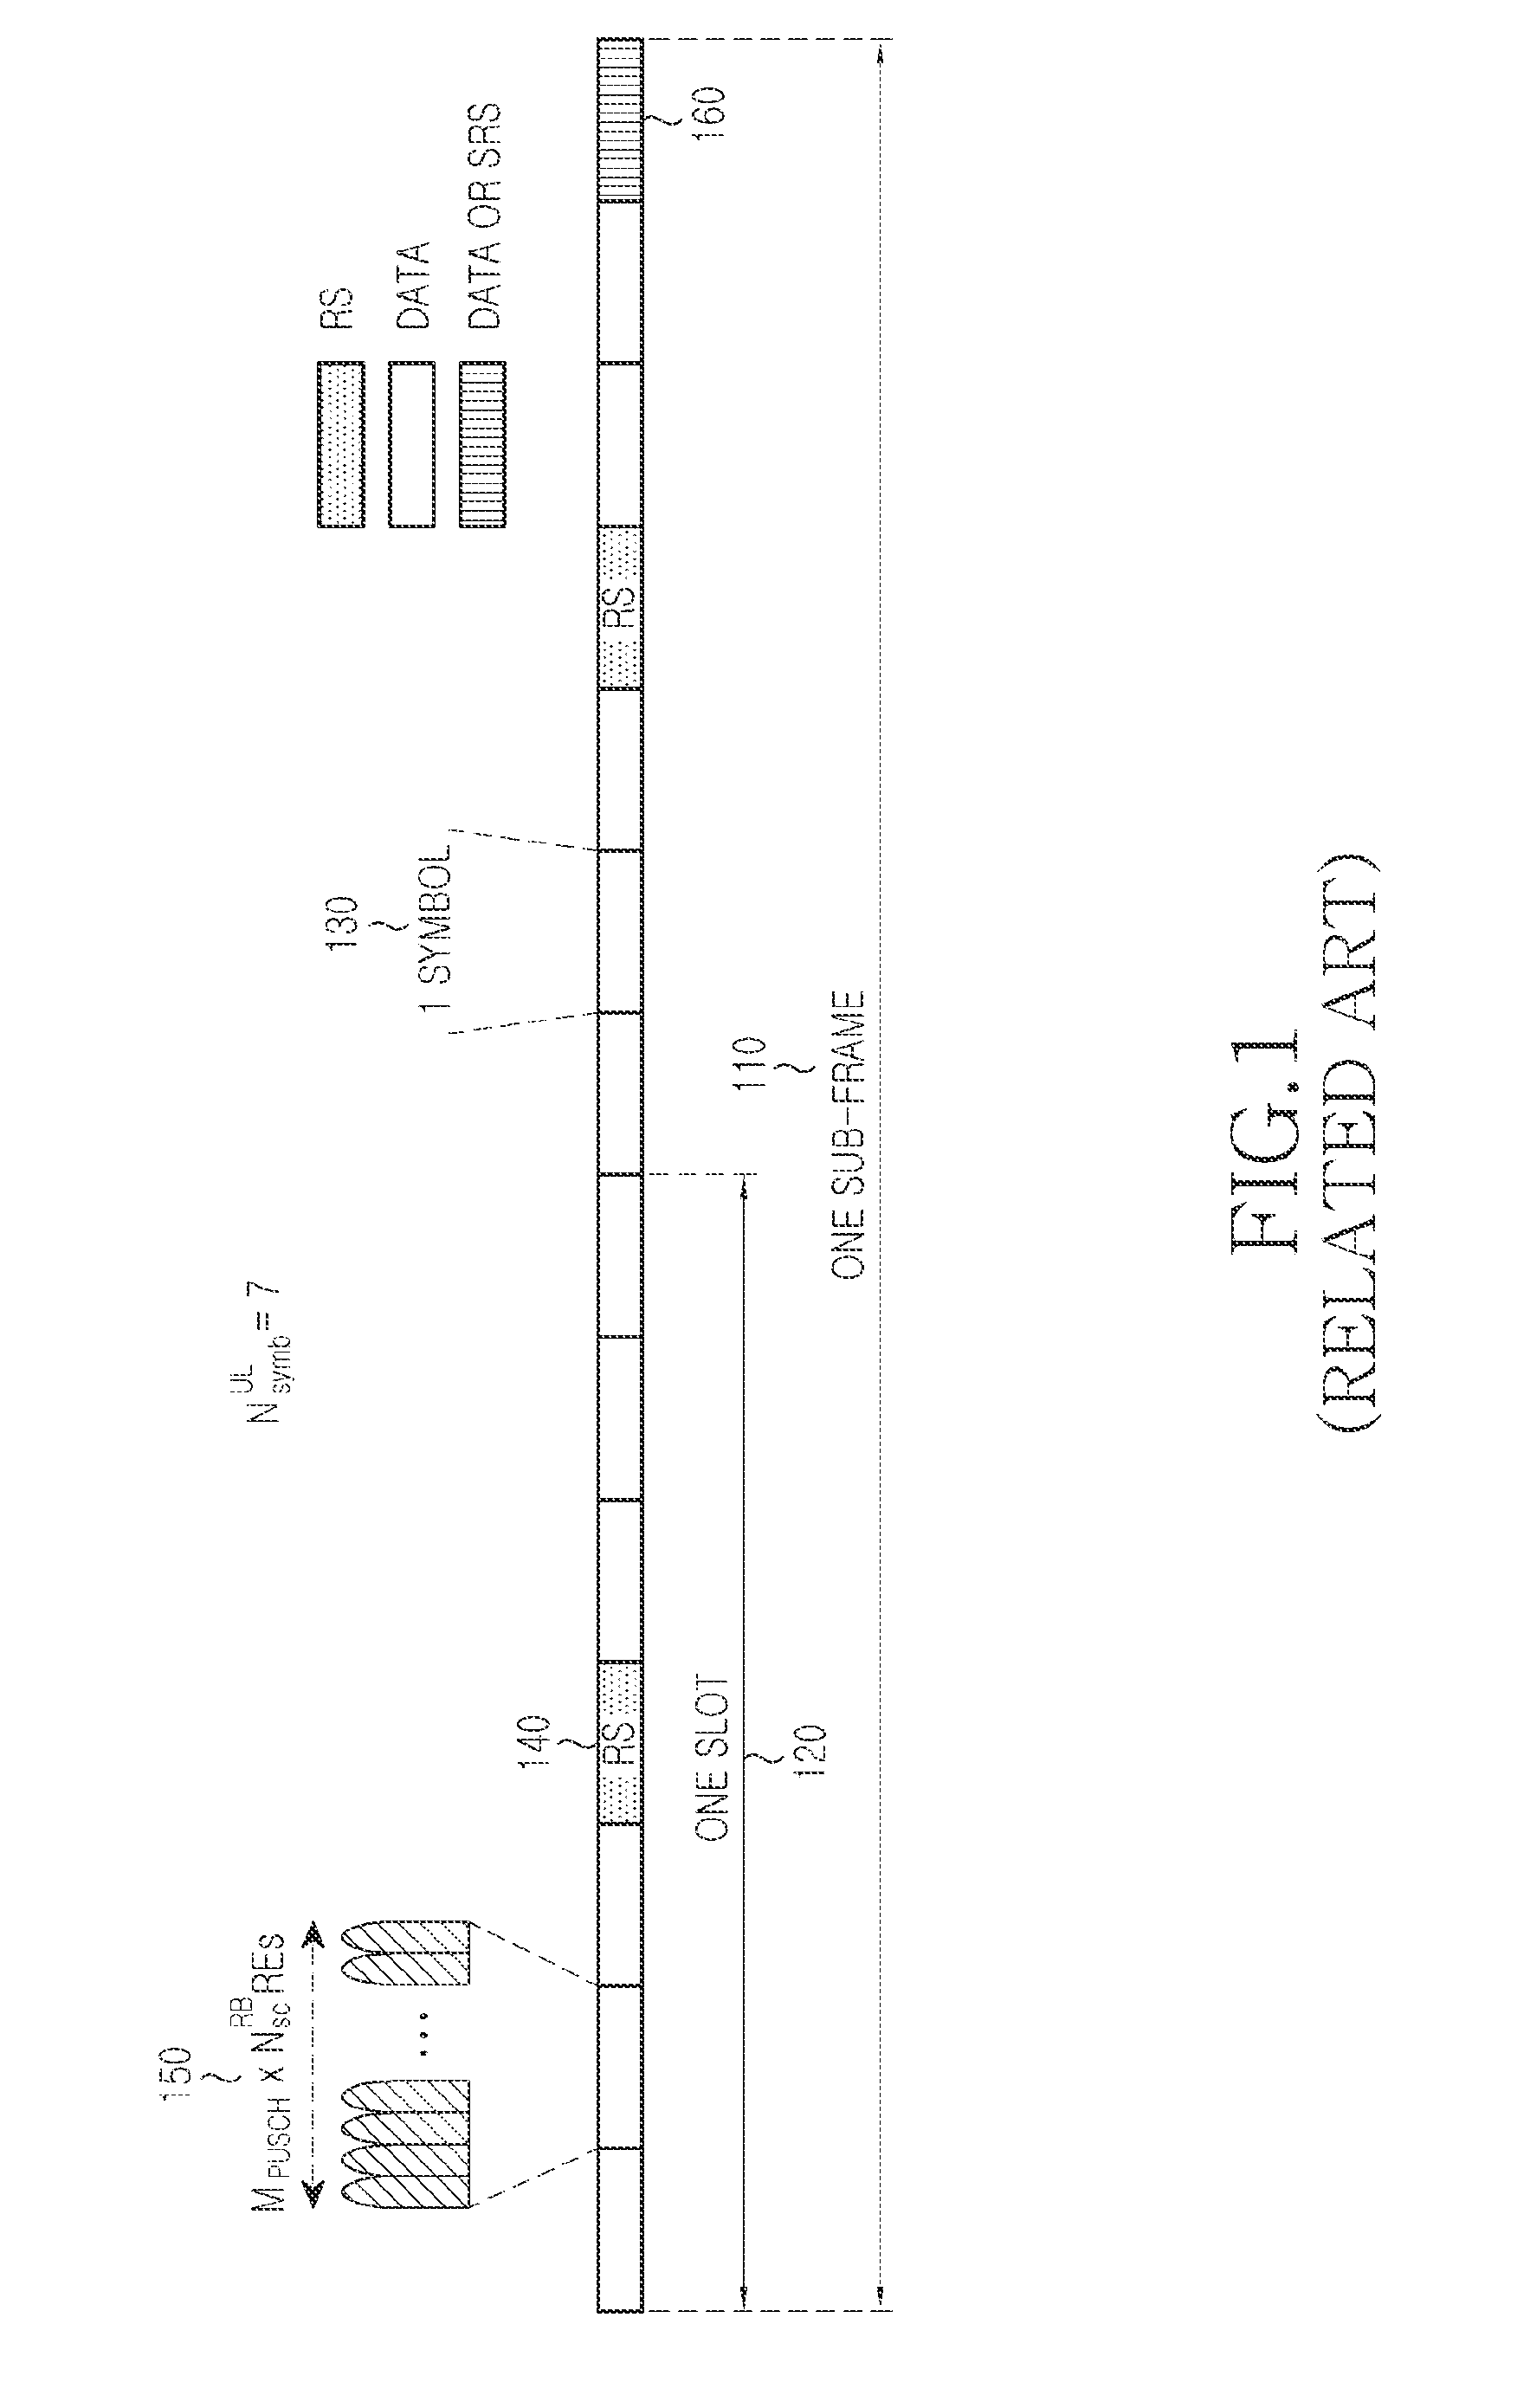 Transmitting uplink control information over a data channel or over a control channel